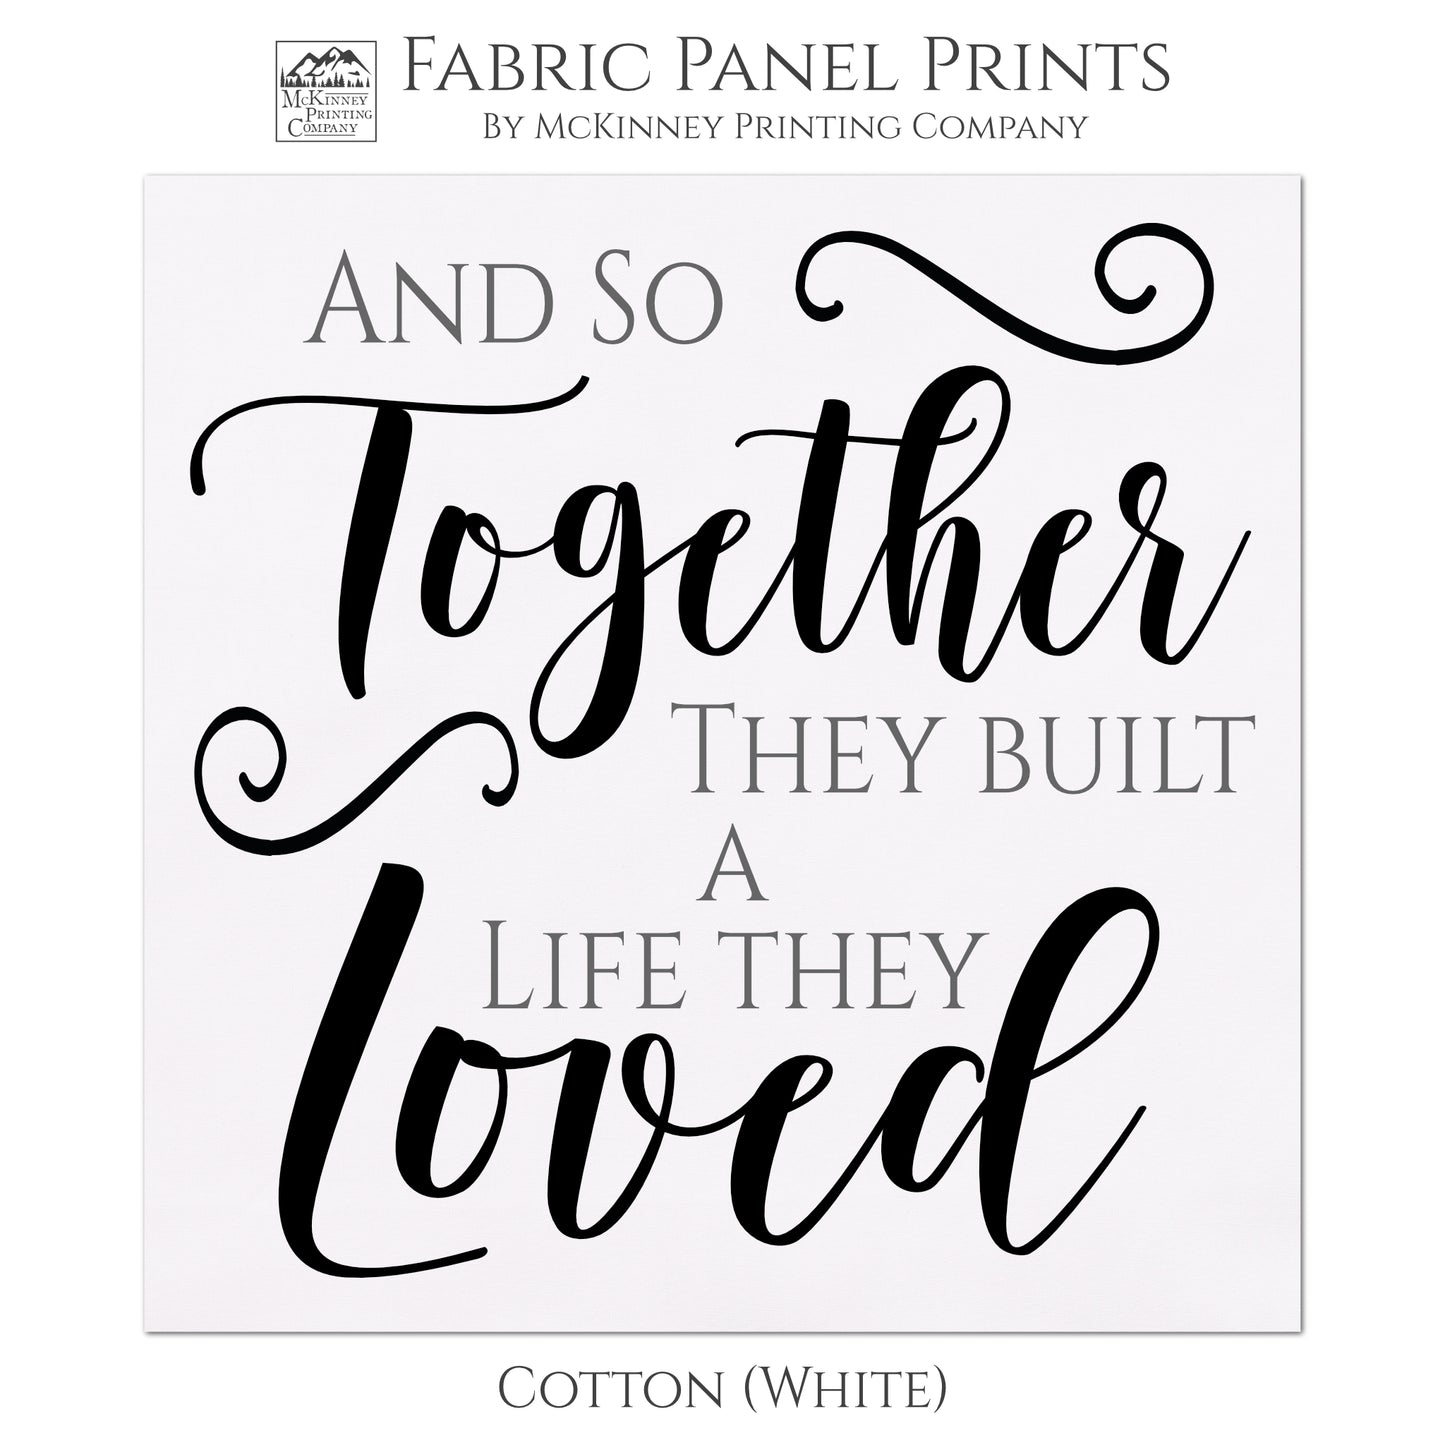 Moving In Together - Cotton Fabric Panel Print, For Engagement & Wedding Quilts, Wall Art, Housewarming - Cotton, White